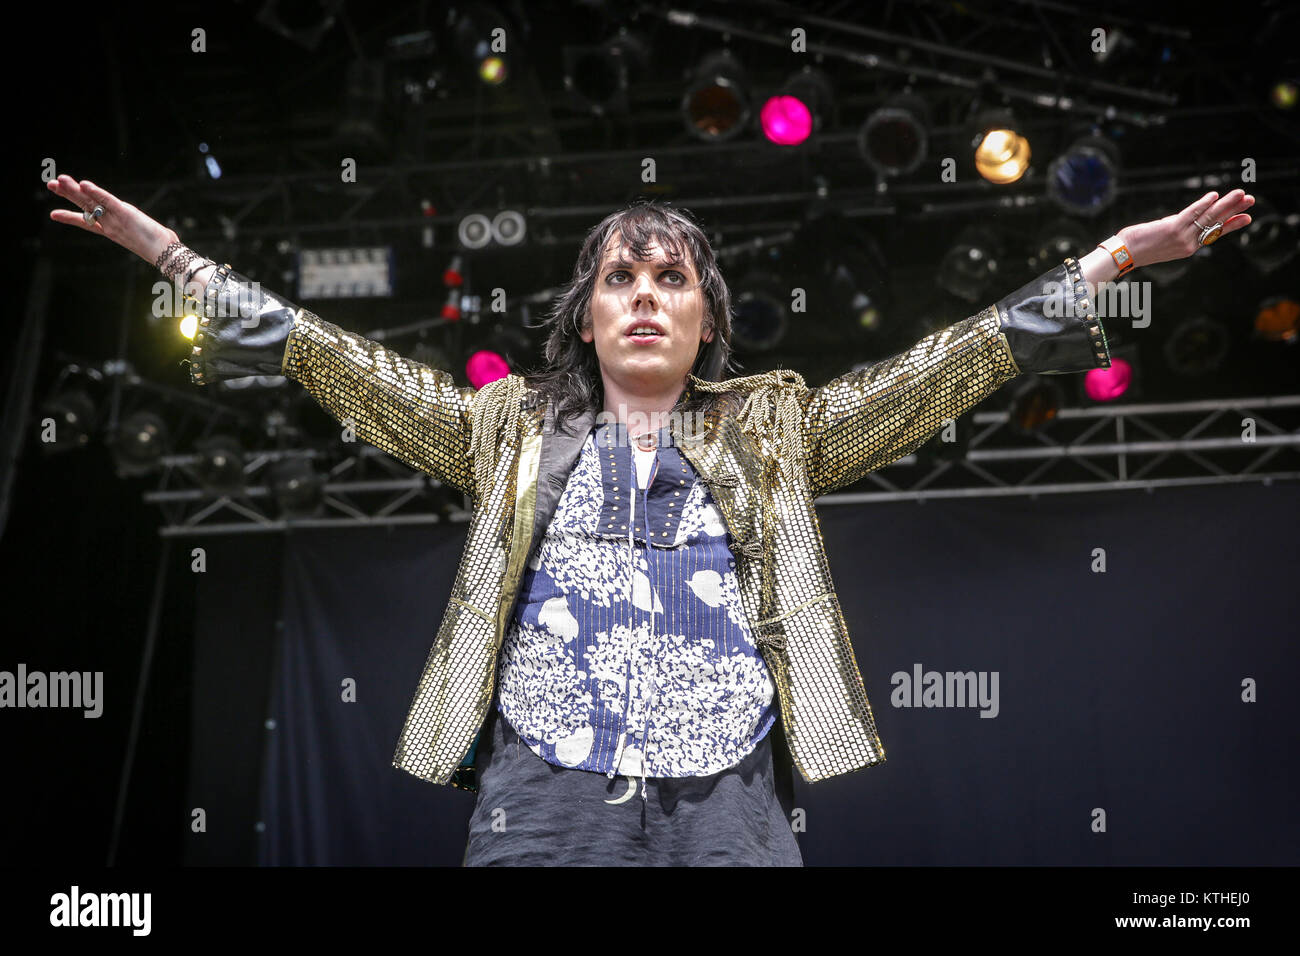 The English rock band The Struts performs a live concert at the Sweden Rock Festival 2016. Here vocalist Luke Spiller is seen live on stage. Sweden, 09/06 2016. Stock Photo